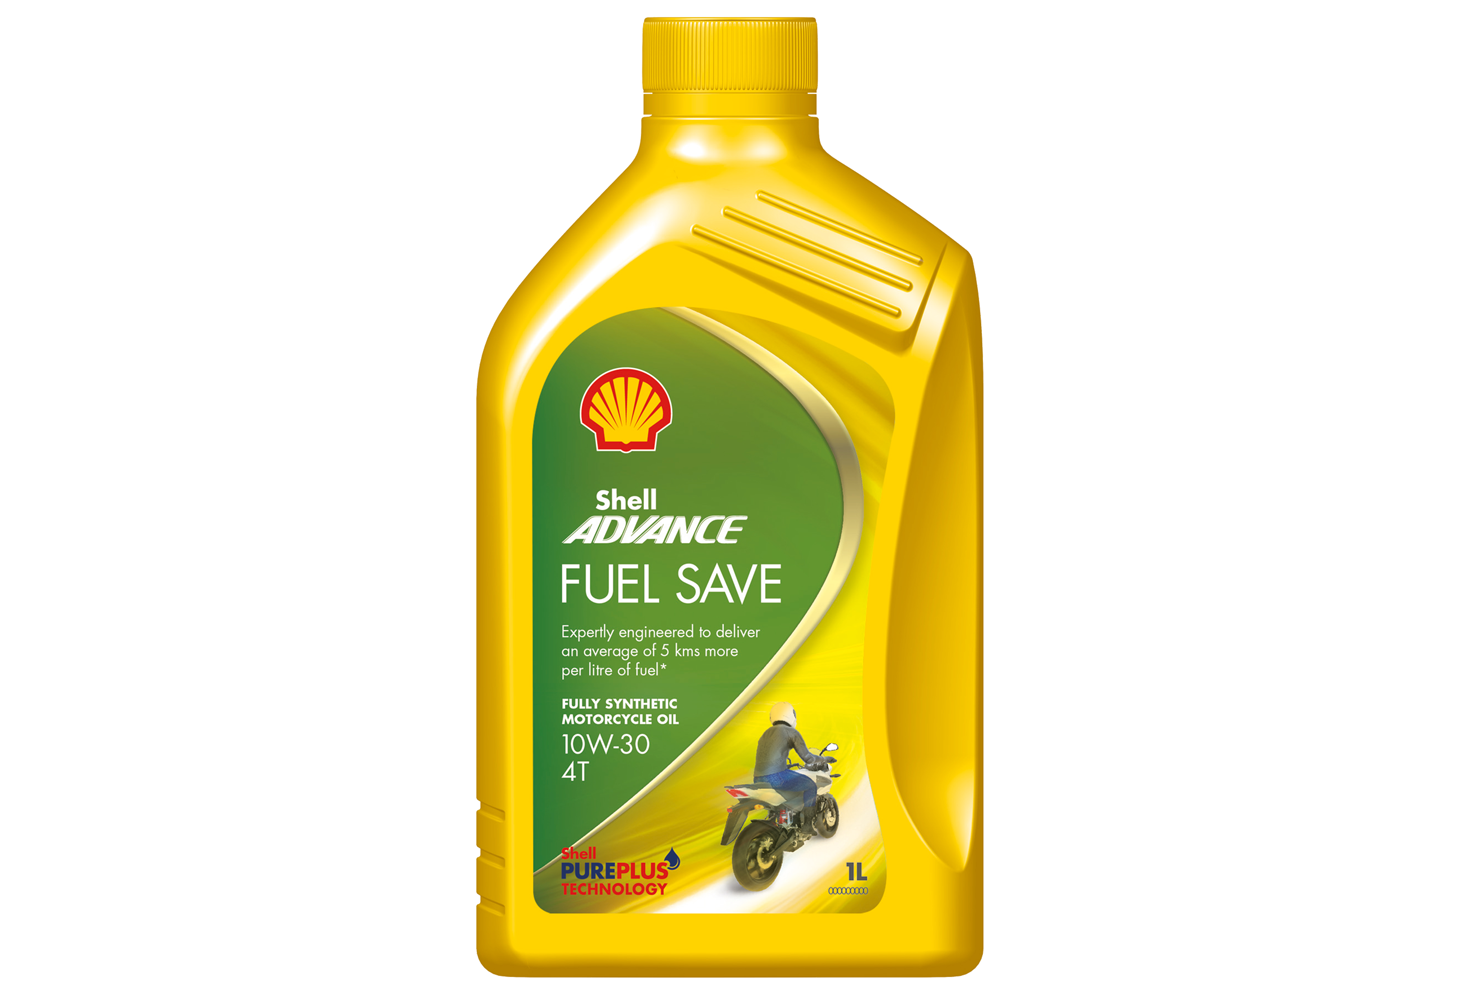 Shell India launches Shell Advance Fuel Save 10W-30 engine oil